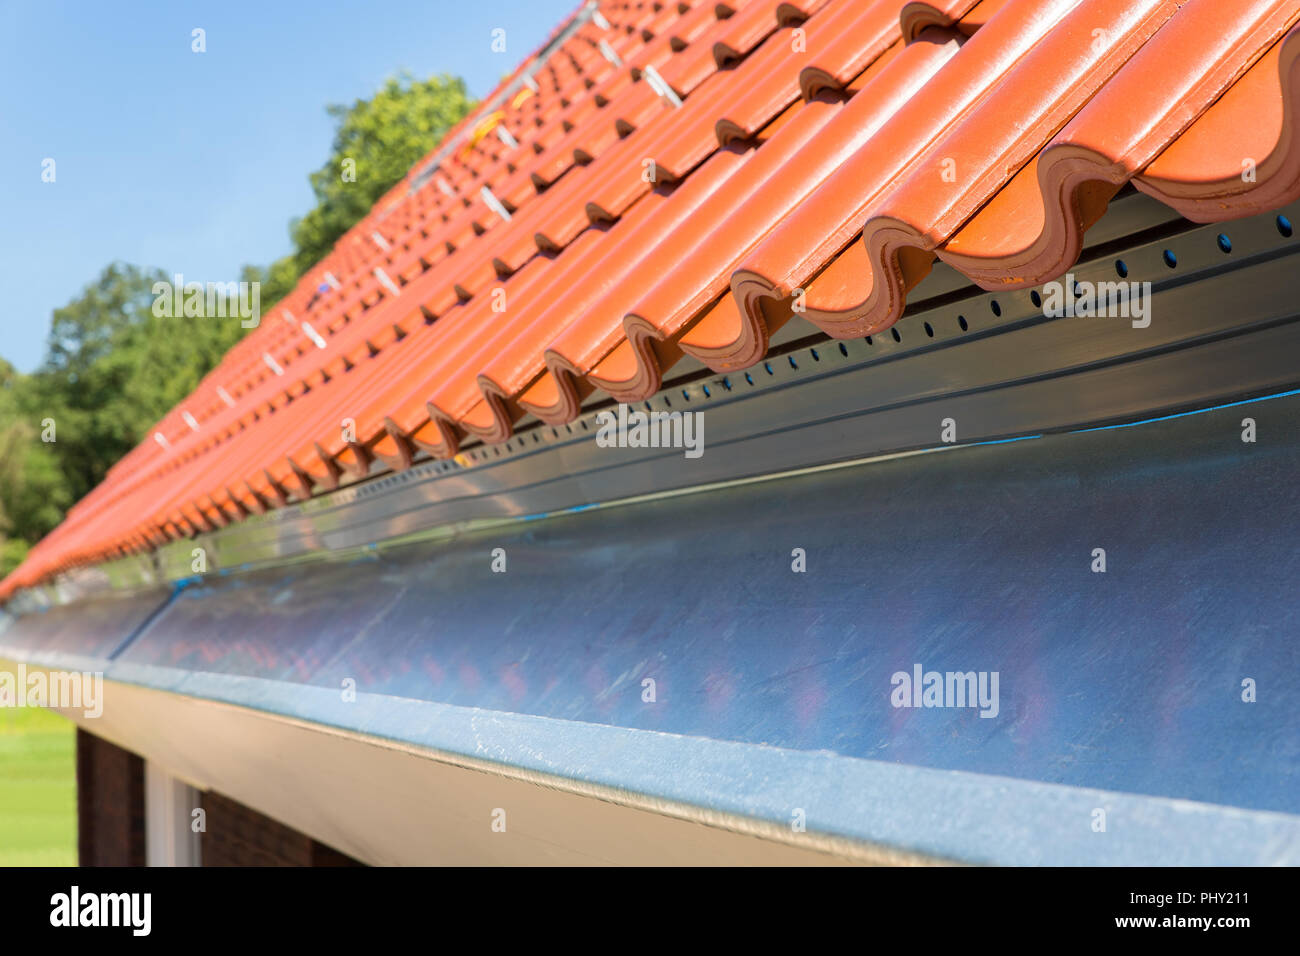 Close up new gutter with roof tiles Stock Photo